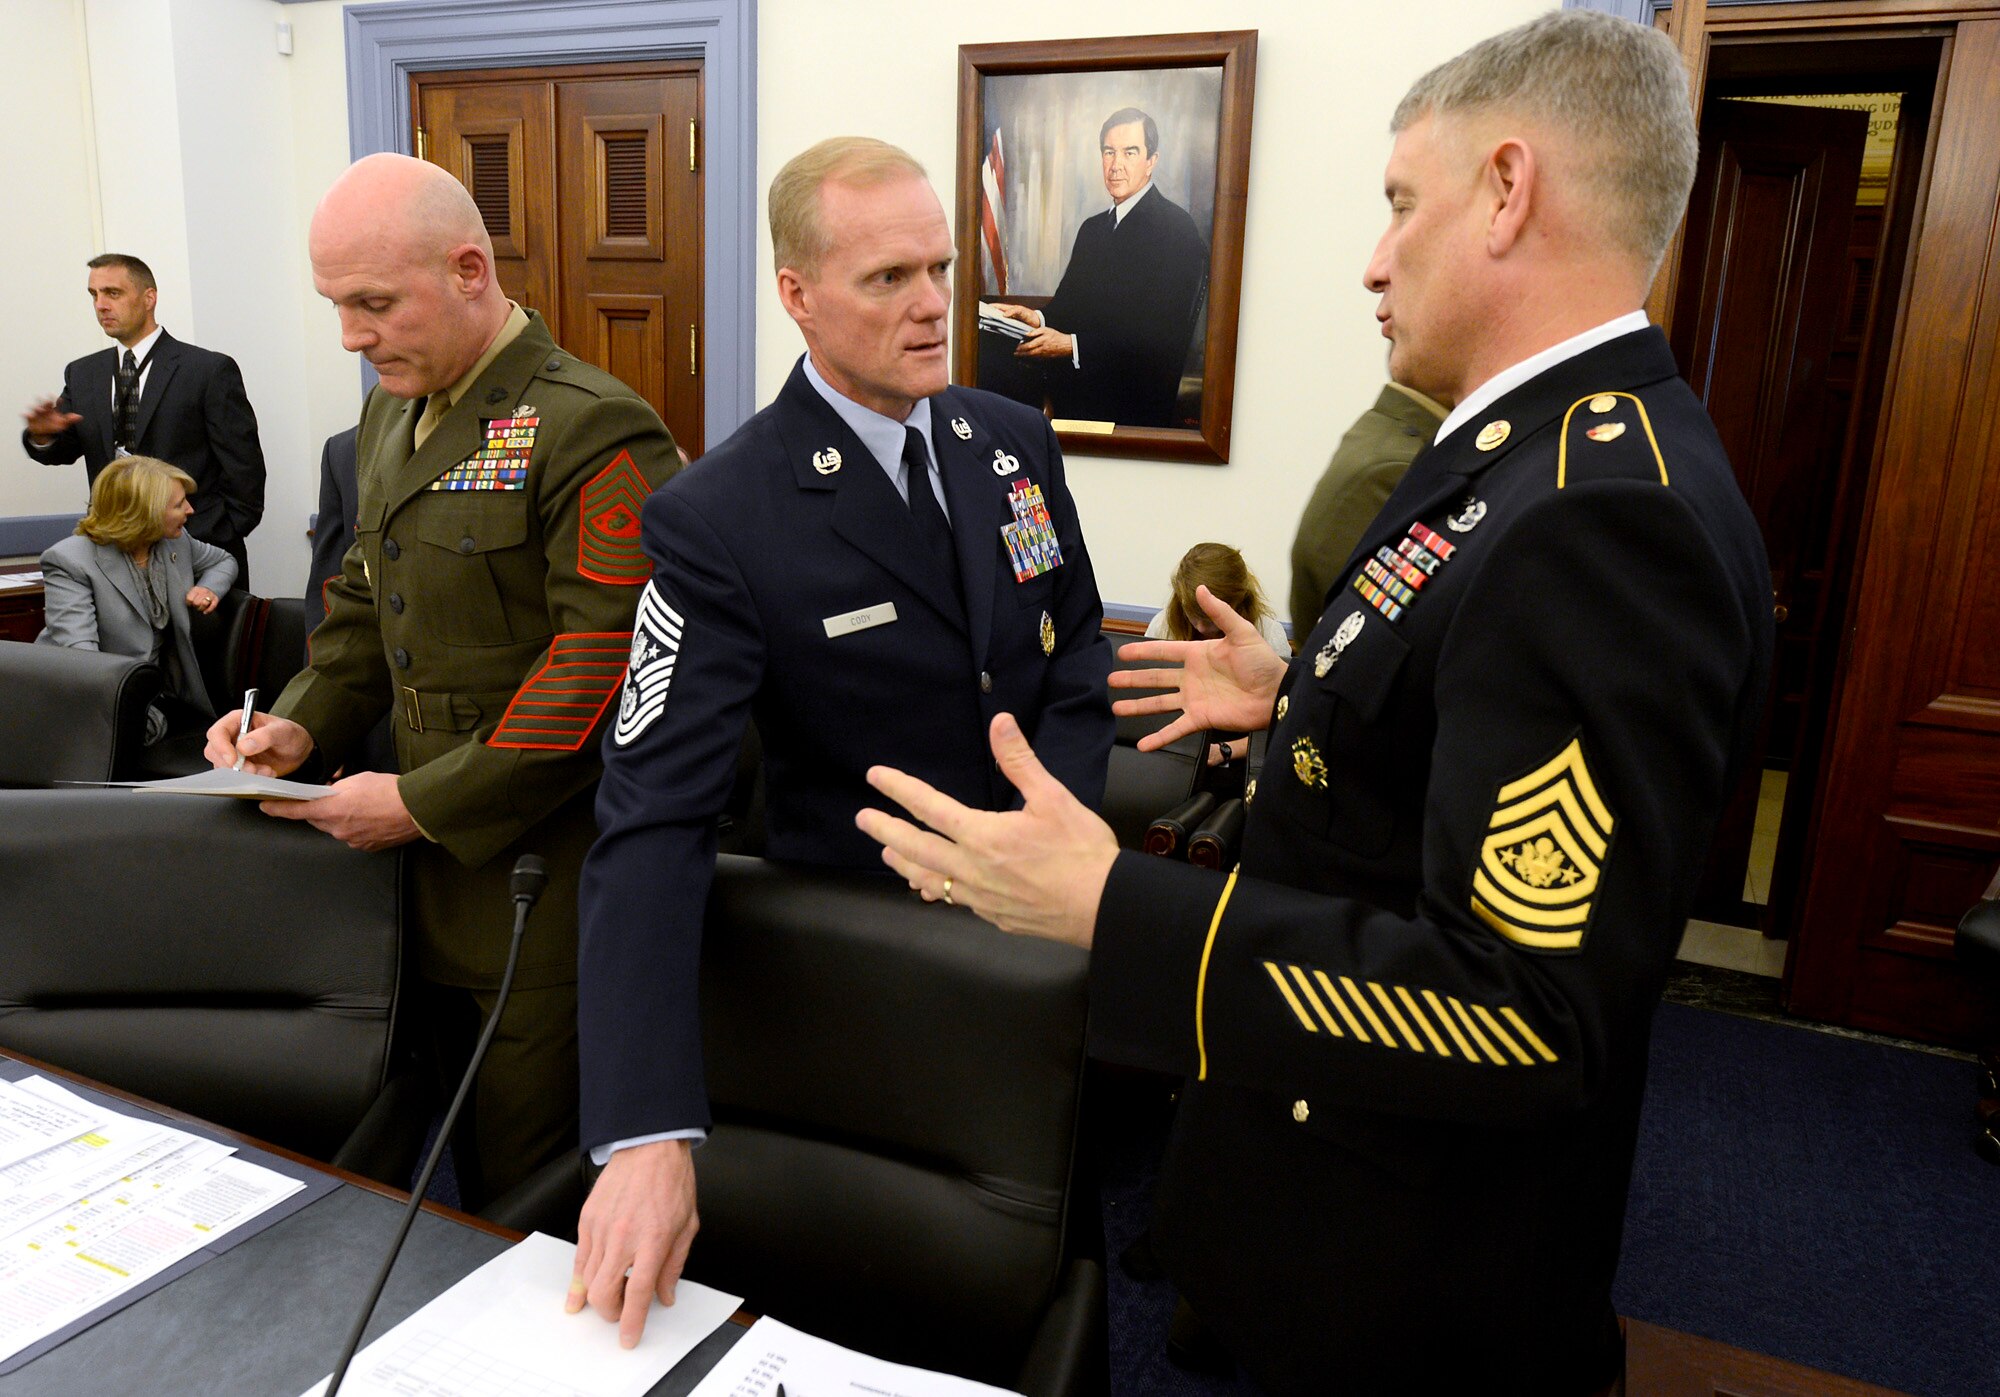 Chief Master Sgt. of the Air Force James Cody talks with Sergeant Major of the Army Raymond Chandler as they prepare to testify before members of the House Appropriations Committee on Capitol Hill March 19, 2013.  The two senior enlisted leaders, along with Sergeant Major of the Marine Corps Micheal Barrett, testified on the quality of life in the military.  (U.S. Air Force photo/Scott M. Ash)